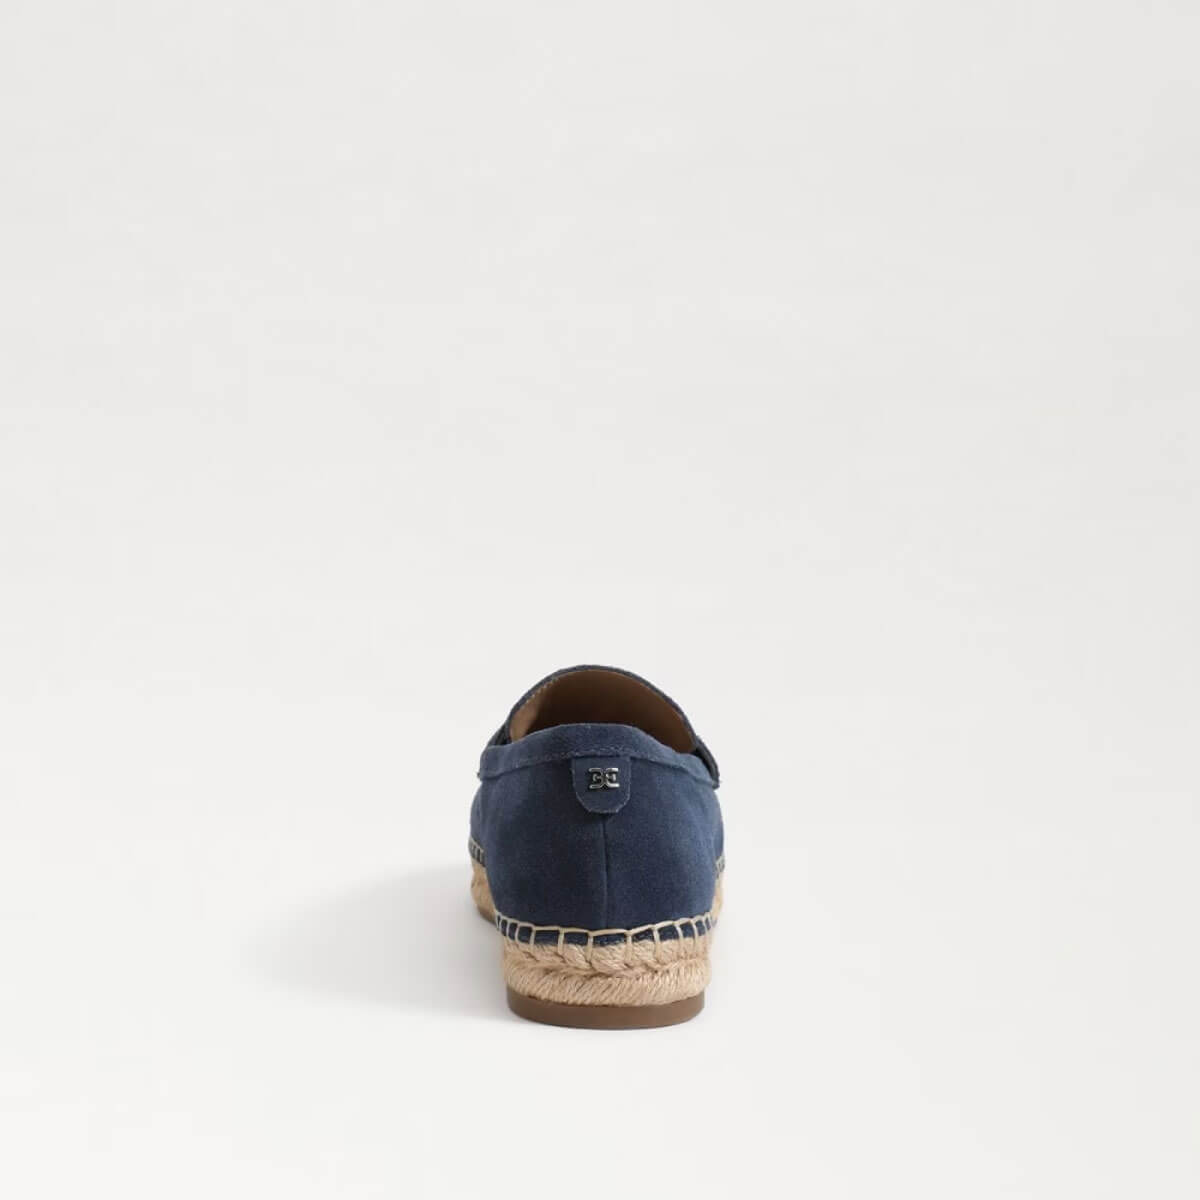 Sam Edelman Kai Espadrille Flat Loafer blue back  | MILK MONEY milkmoney.co | cute shoes for women. ladies shoes. nice shoes for women. footwear for women. ladies shoes online. ladies footwear. womens shoes and boots. pretty shoes for women. beautiful shoes for women.